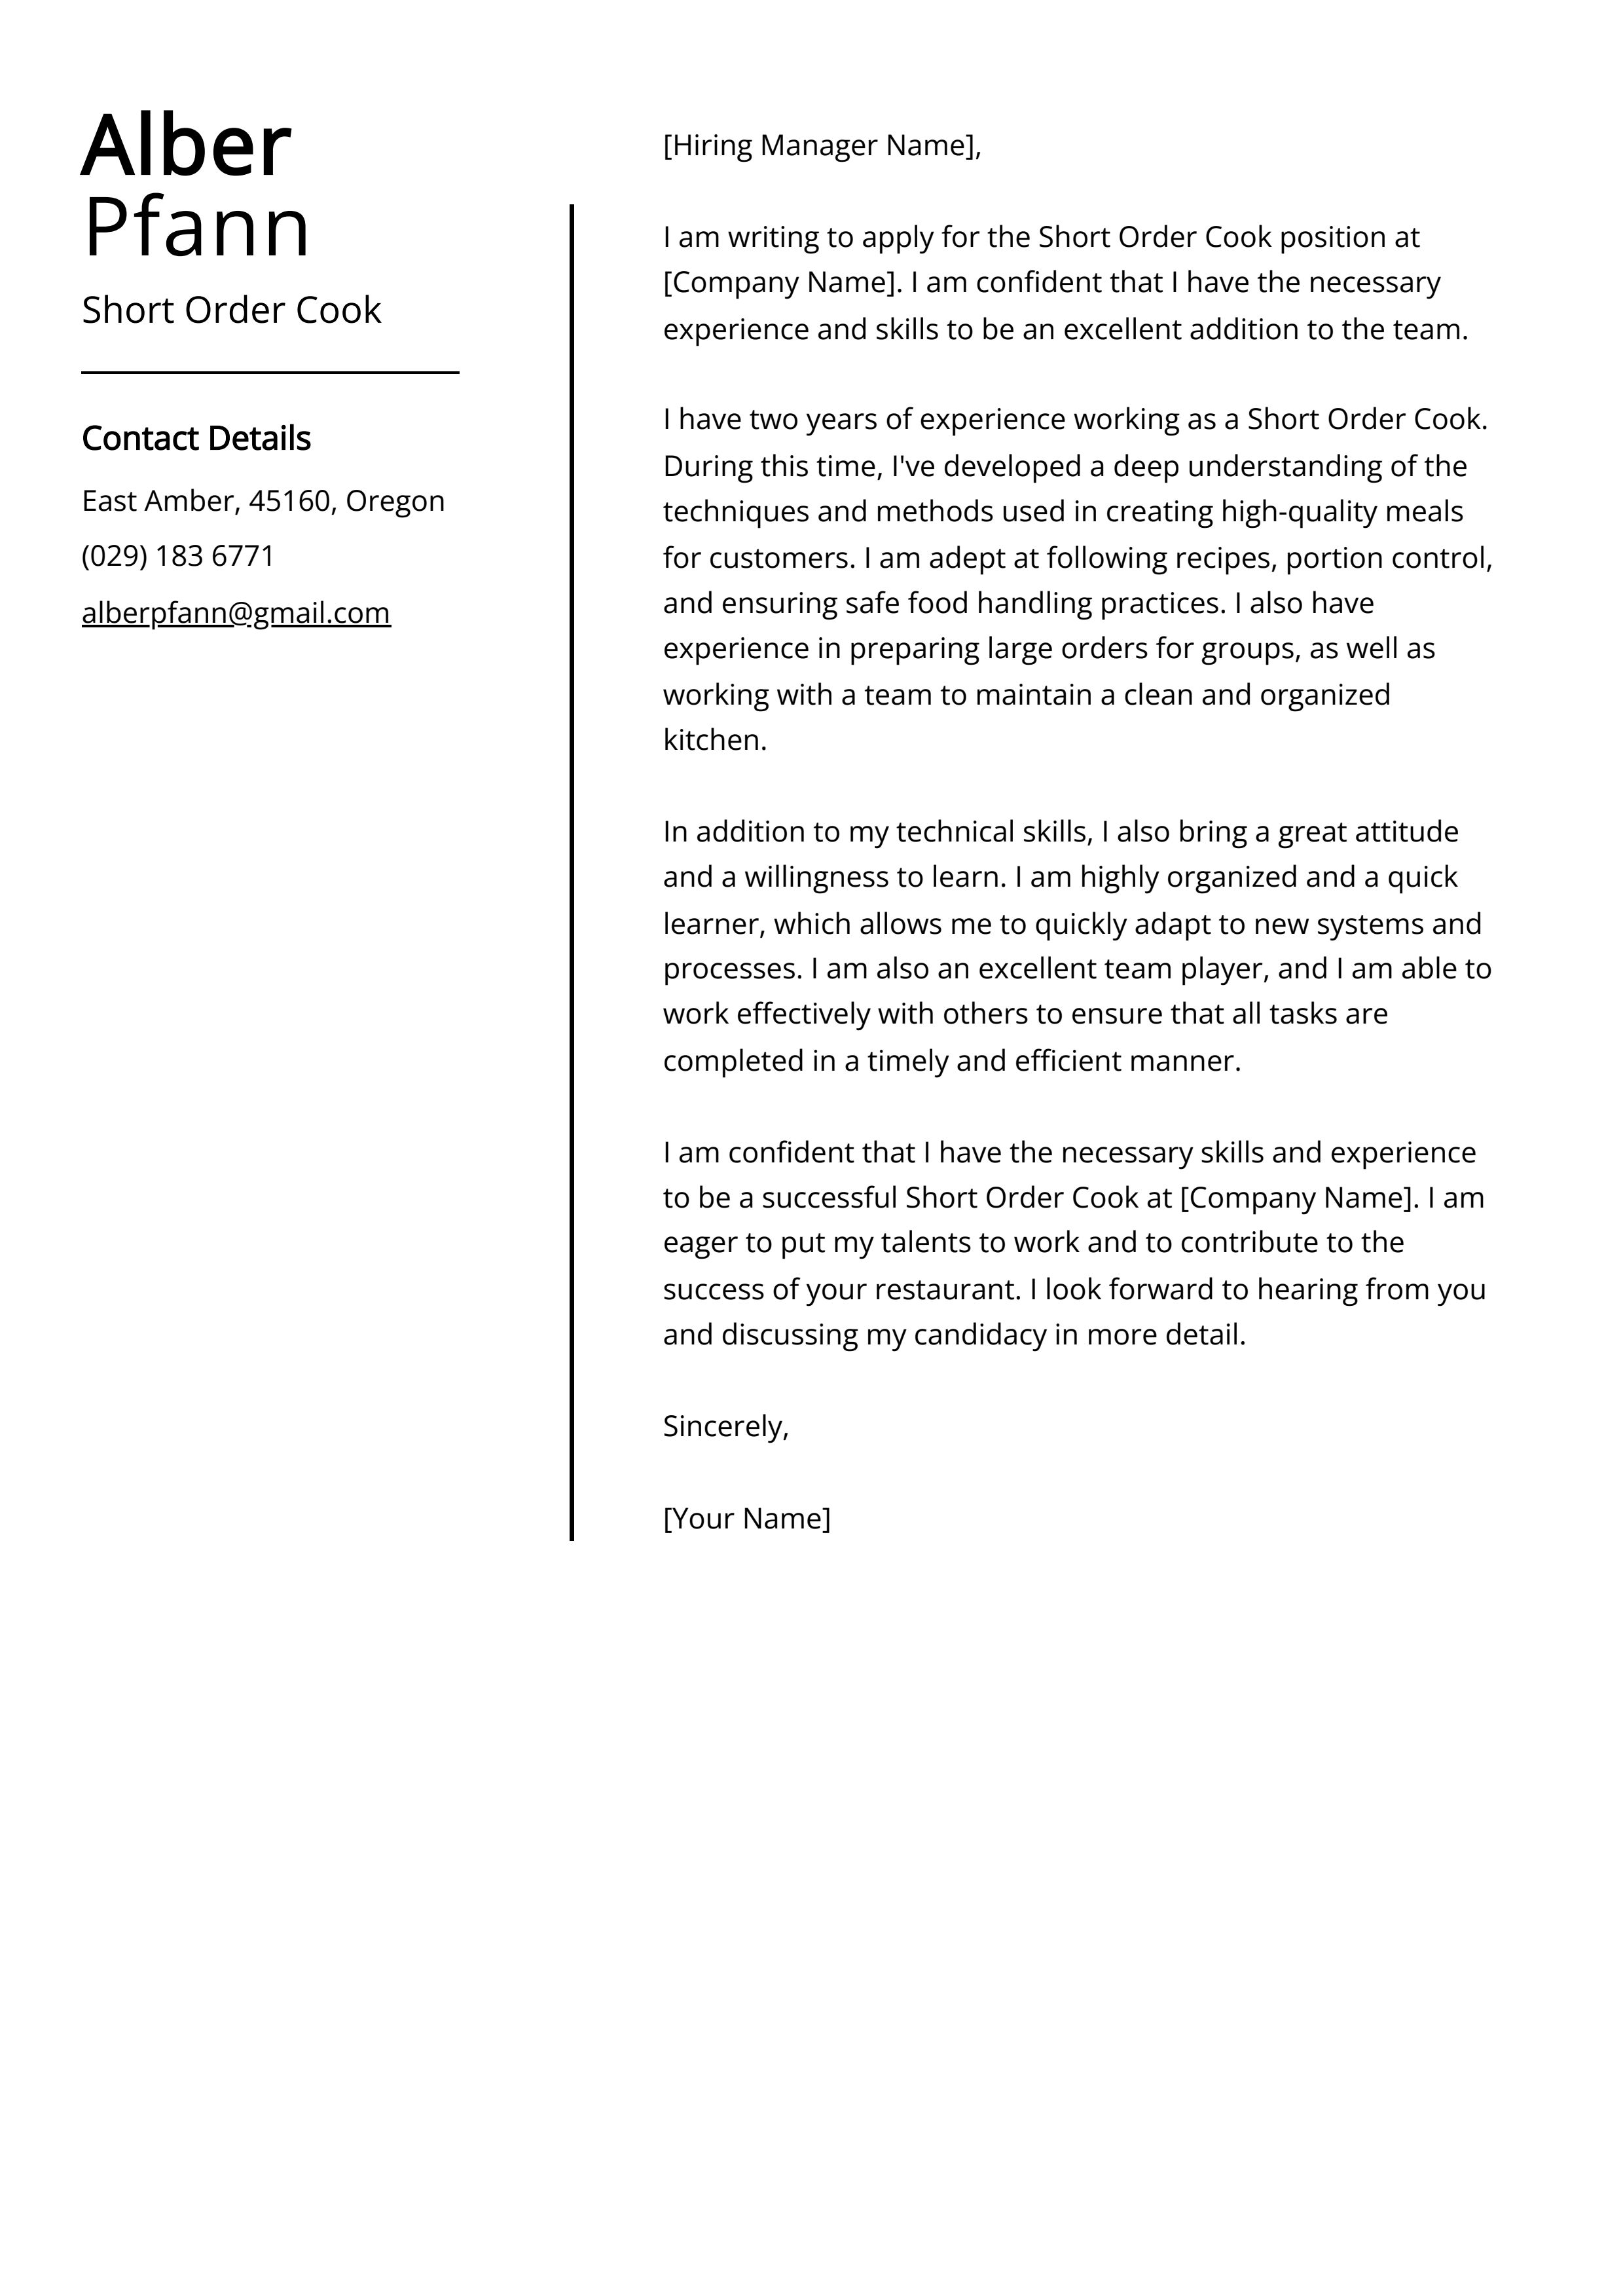 Short Order Cook Cover Letter Example